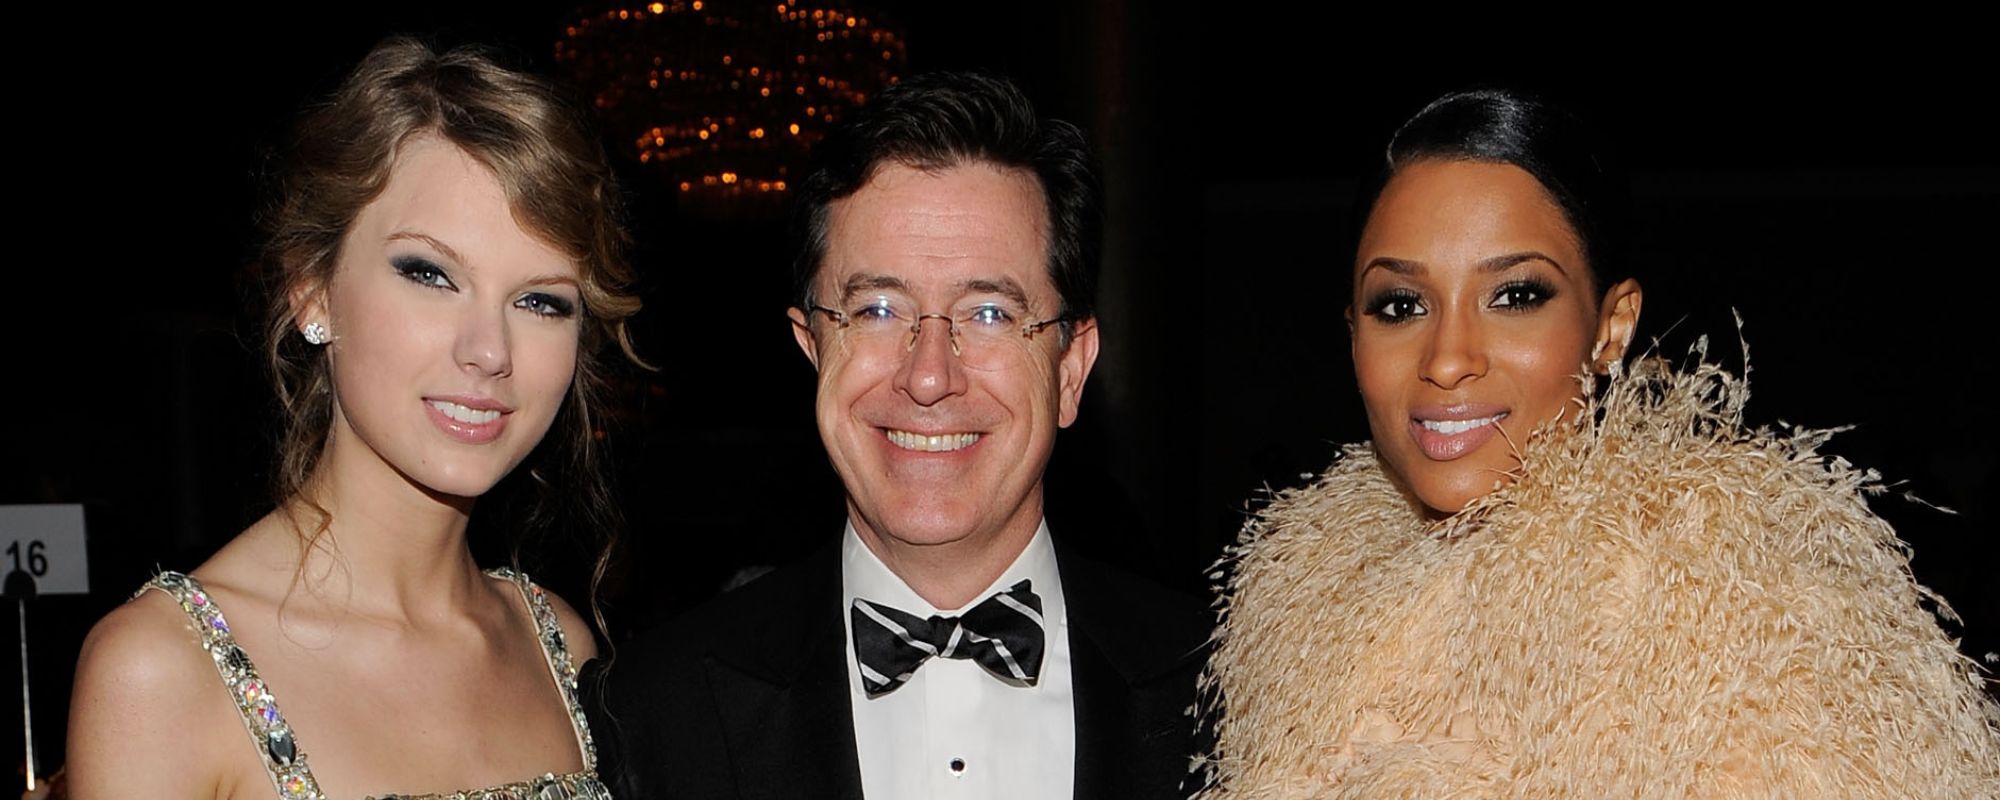 Stephen Colbert Has Very Strong Feelings About Taylor Swift